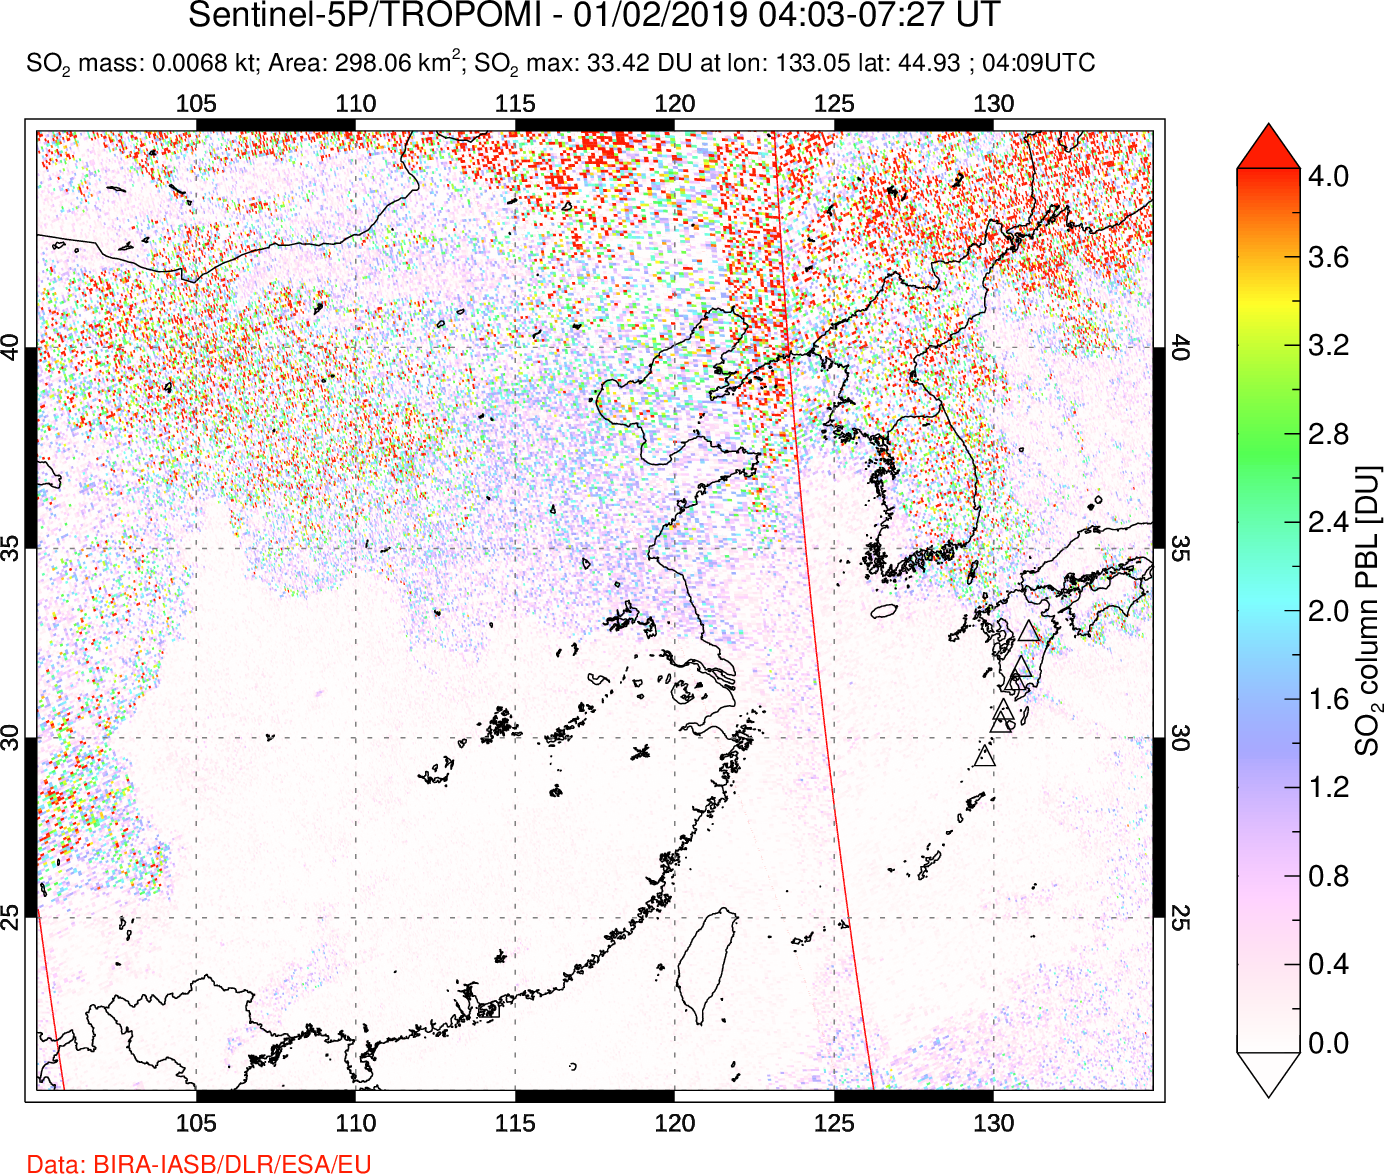 A sulfur dioxide image over Eastern China on Jan 02, 2019.